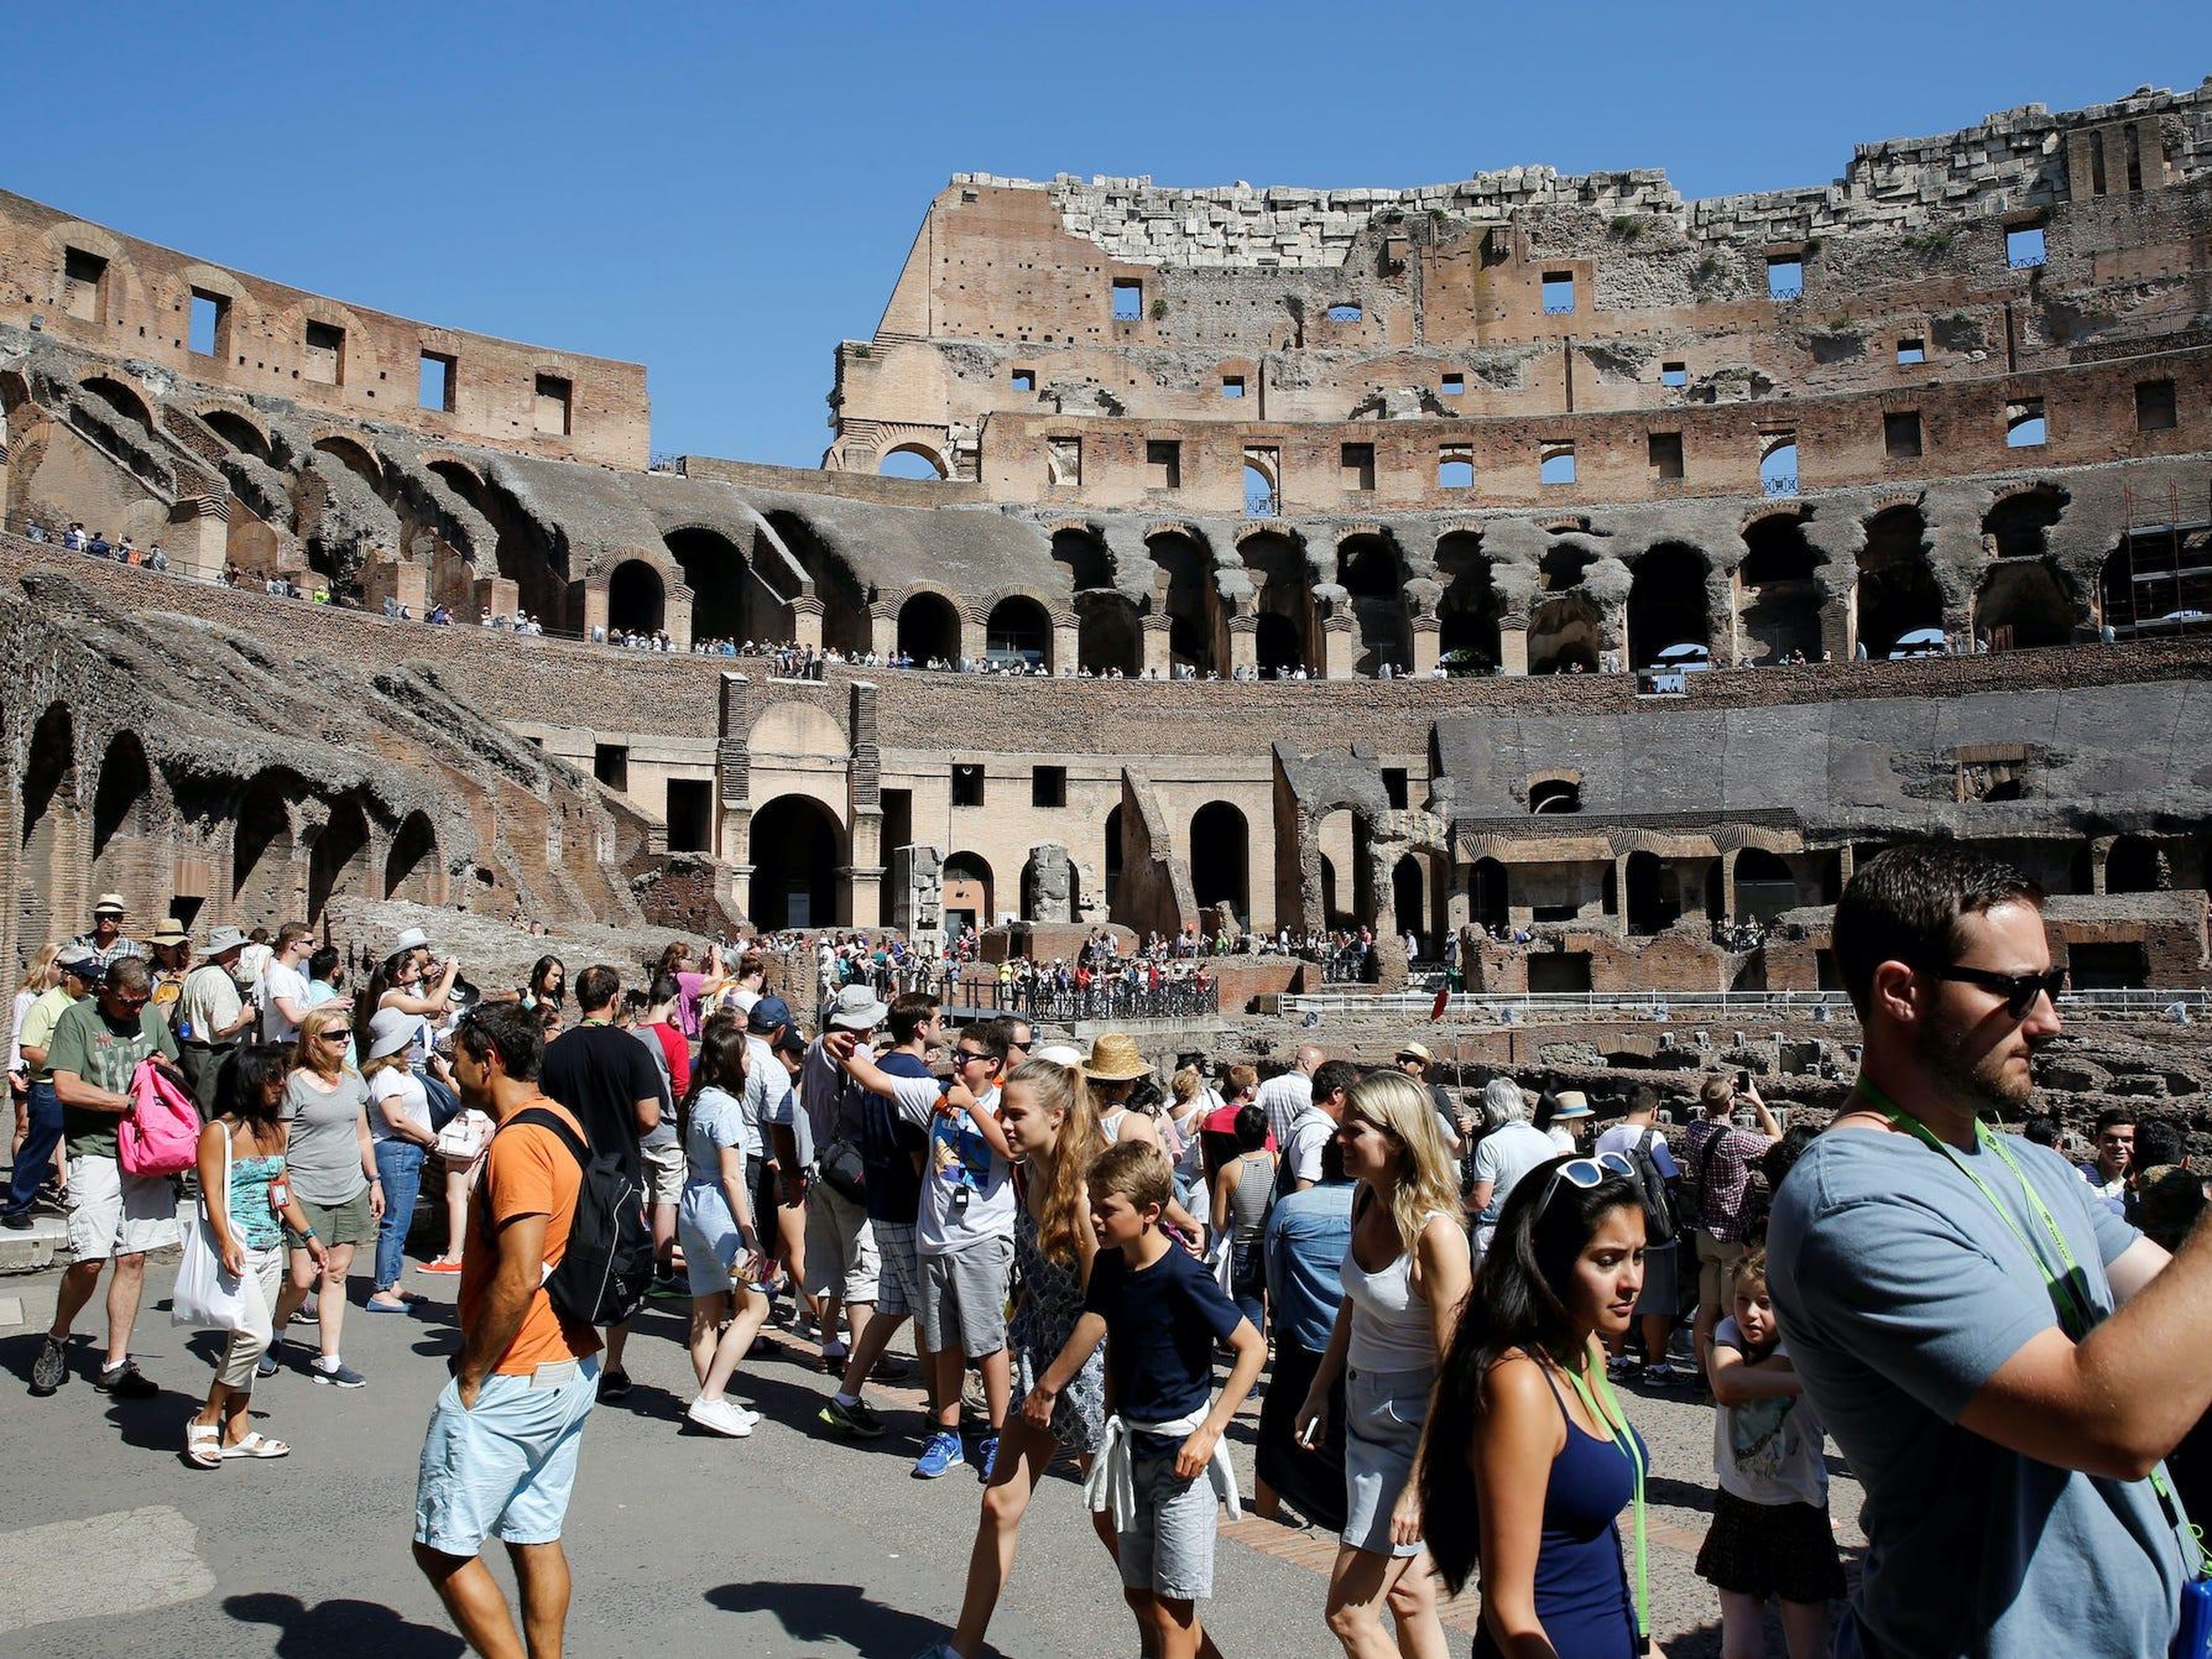 BEFORE: The Colosseum, a UNESCO World Heritage Site, sees about 7.4 million visitors a year, according to a local magazine.